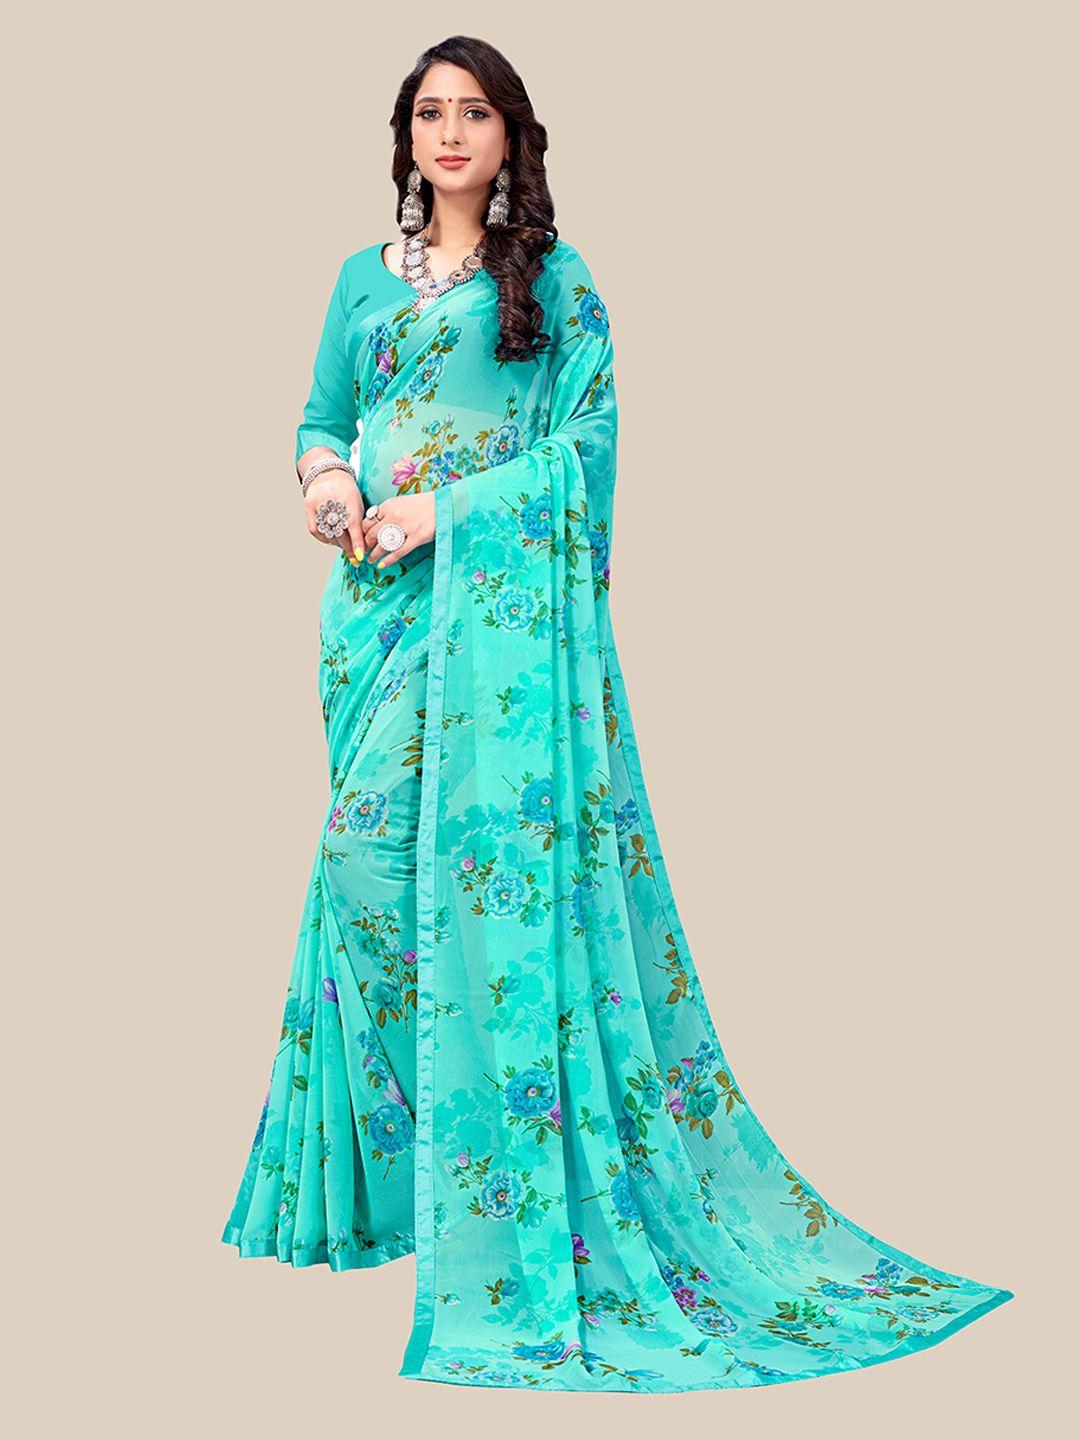 united liberty turquoise blue floral pure georgette saree